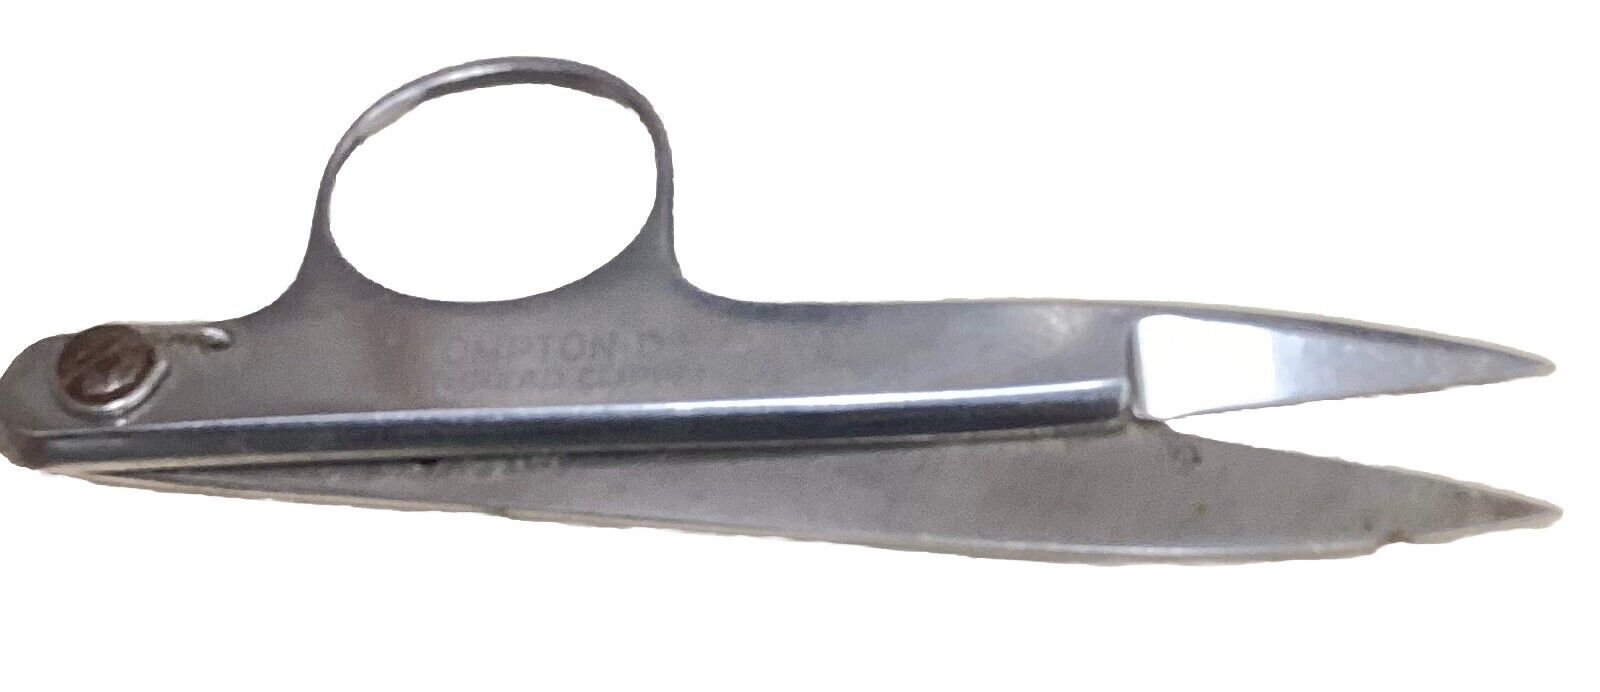 Vintage Compton Thread Clippers